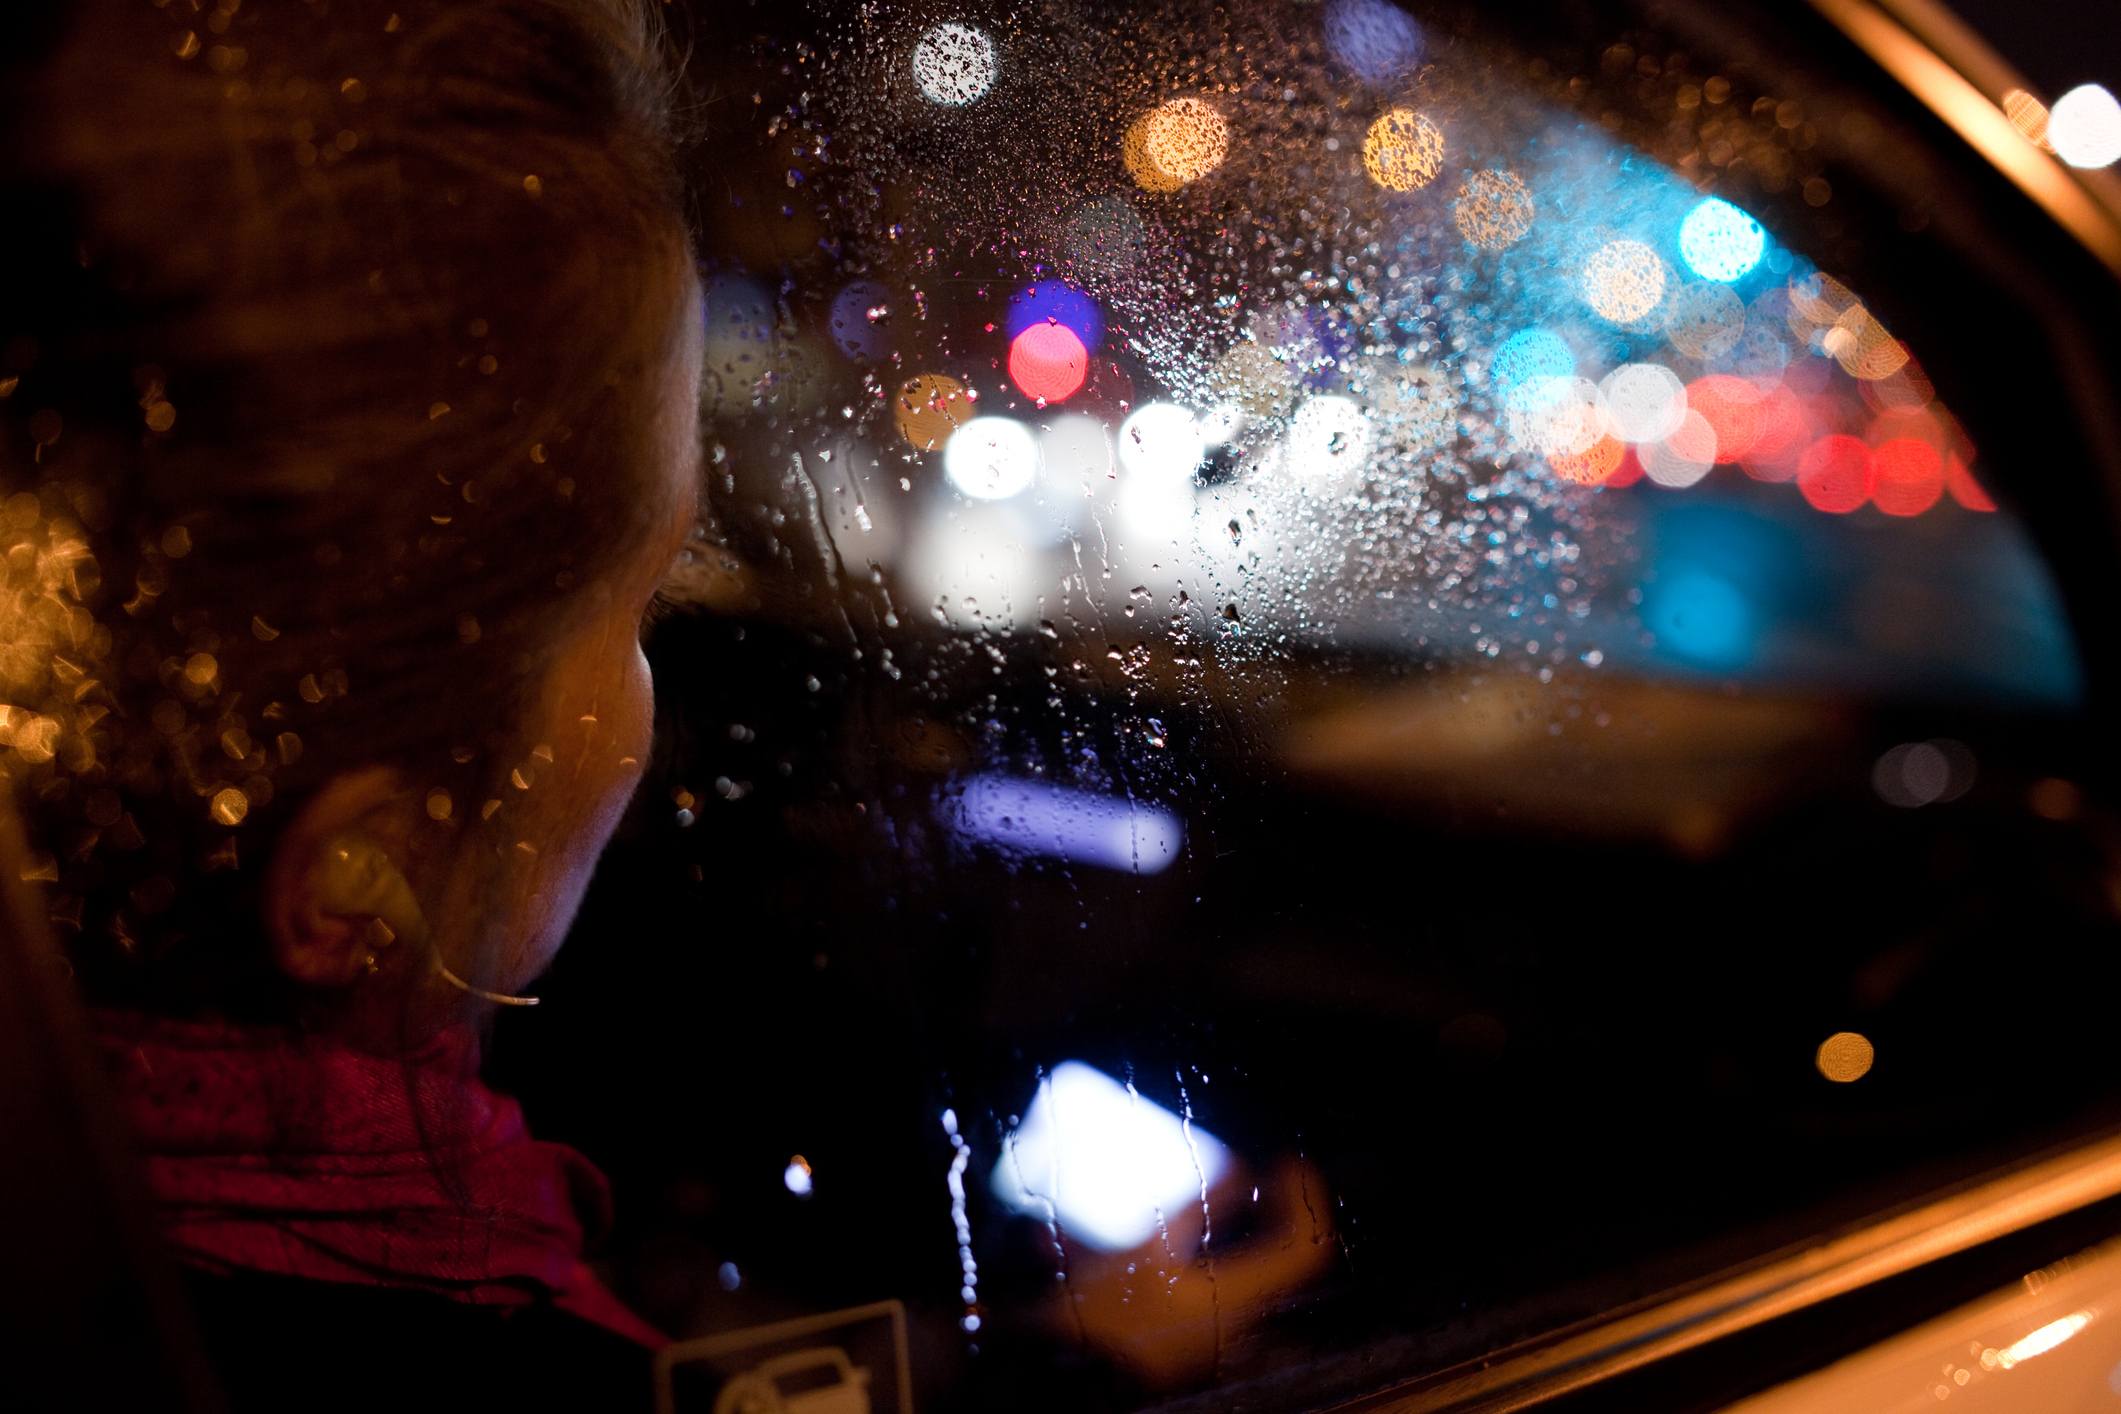 Child looking out car window at night with blurred city lights in the background